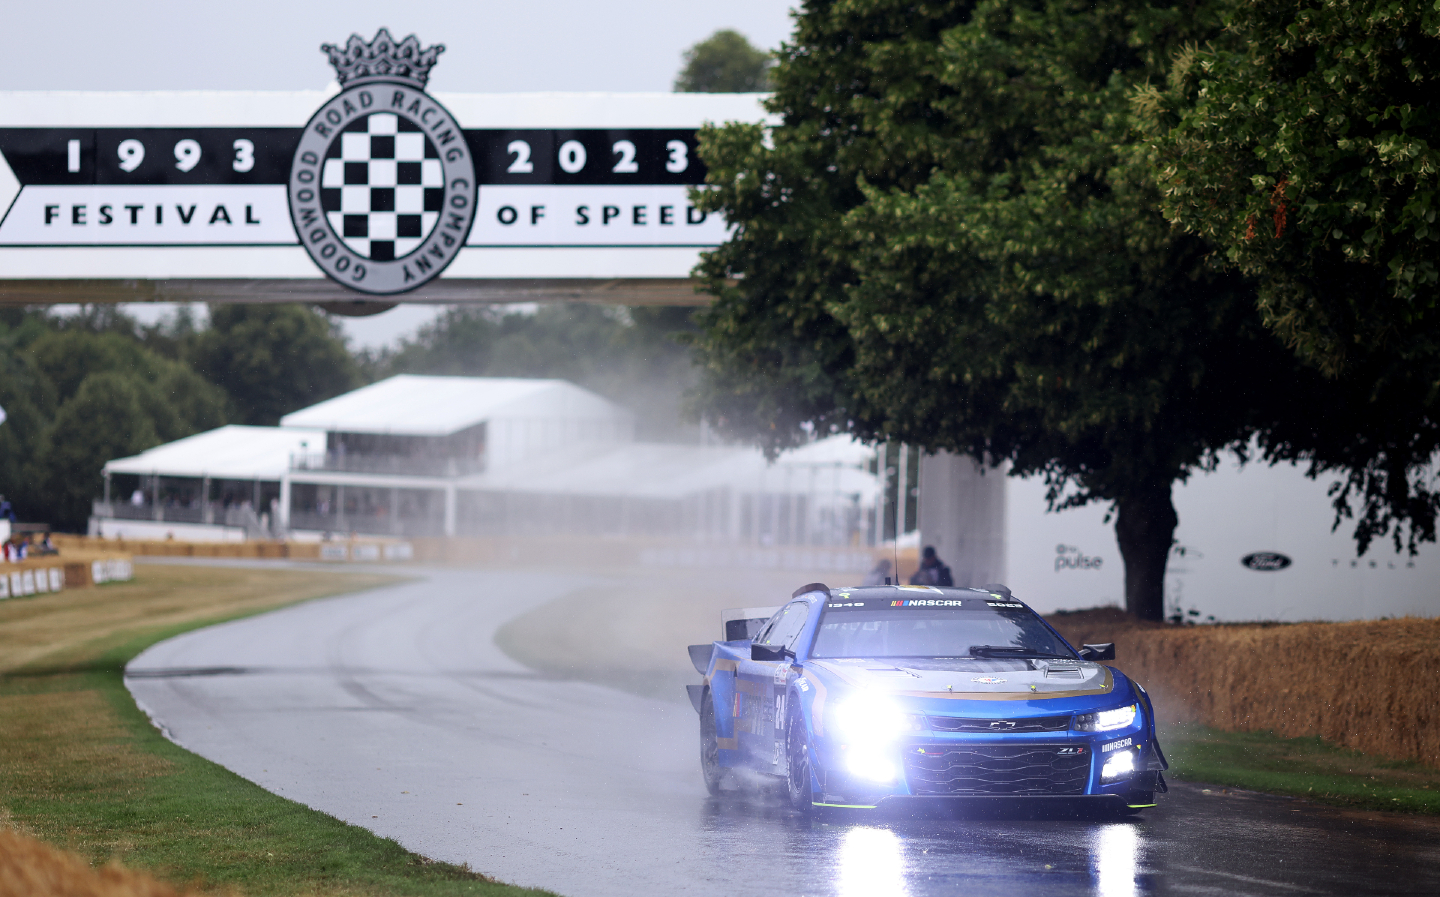 Goodwood Festival of Speed ticket holders told 'all options being looked at' after Saturday running cancelled